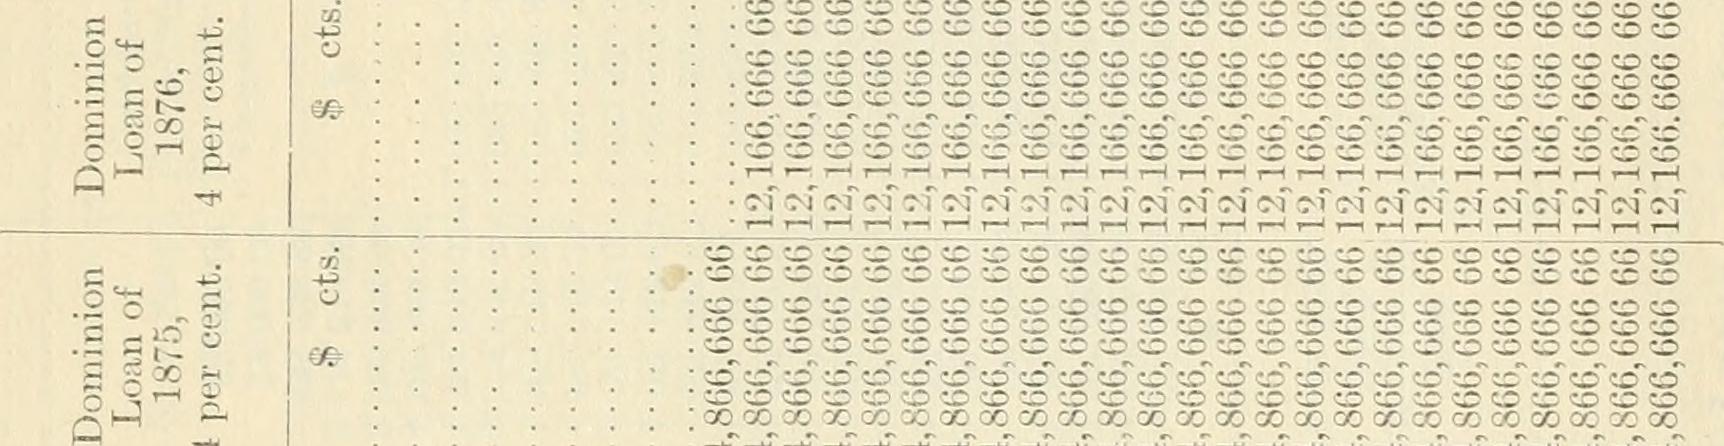 Image from page 108 of "Sessional papers of the Dominion of Canada 1901" (1901)